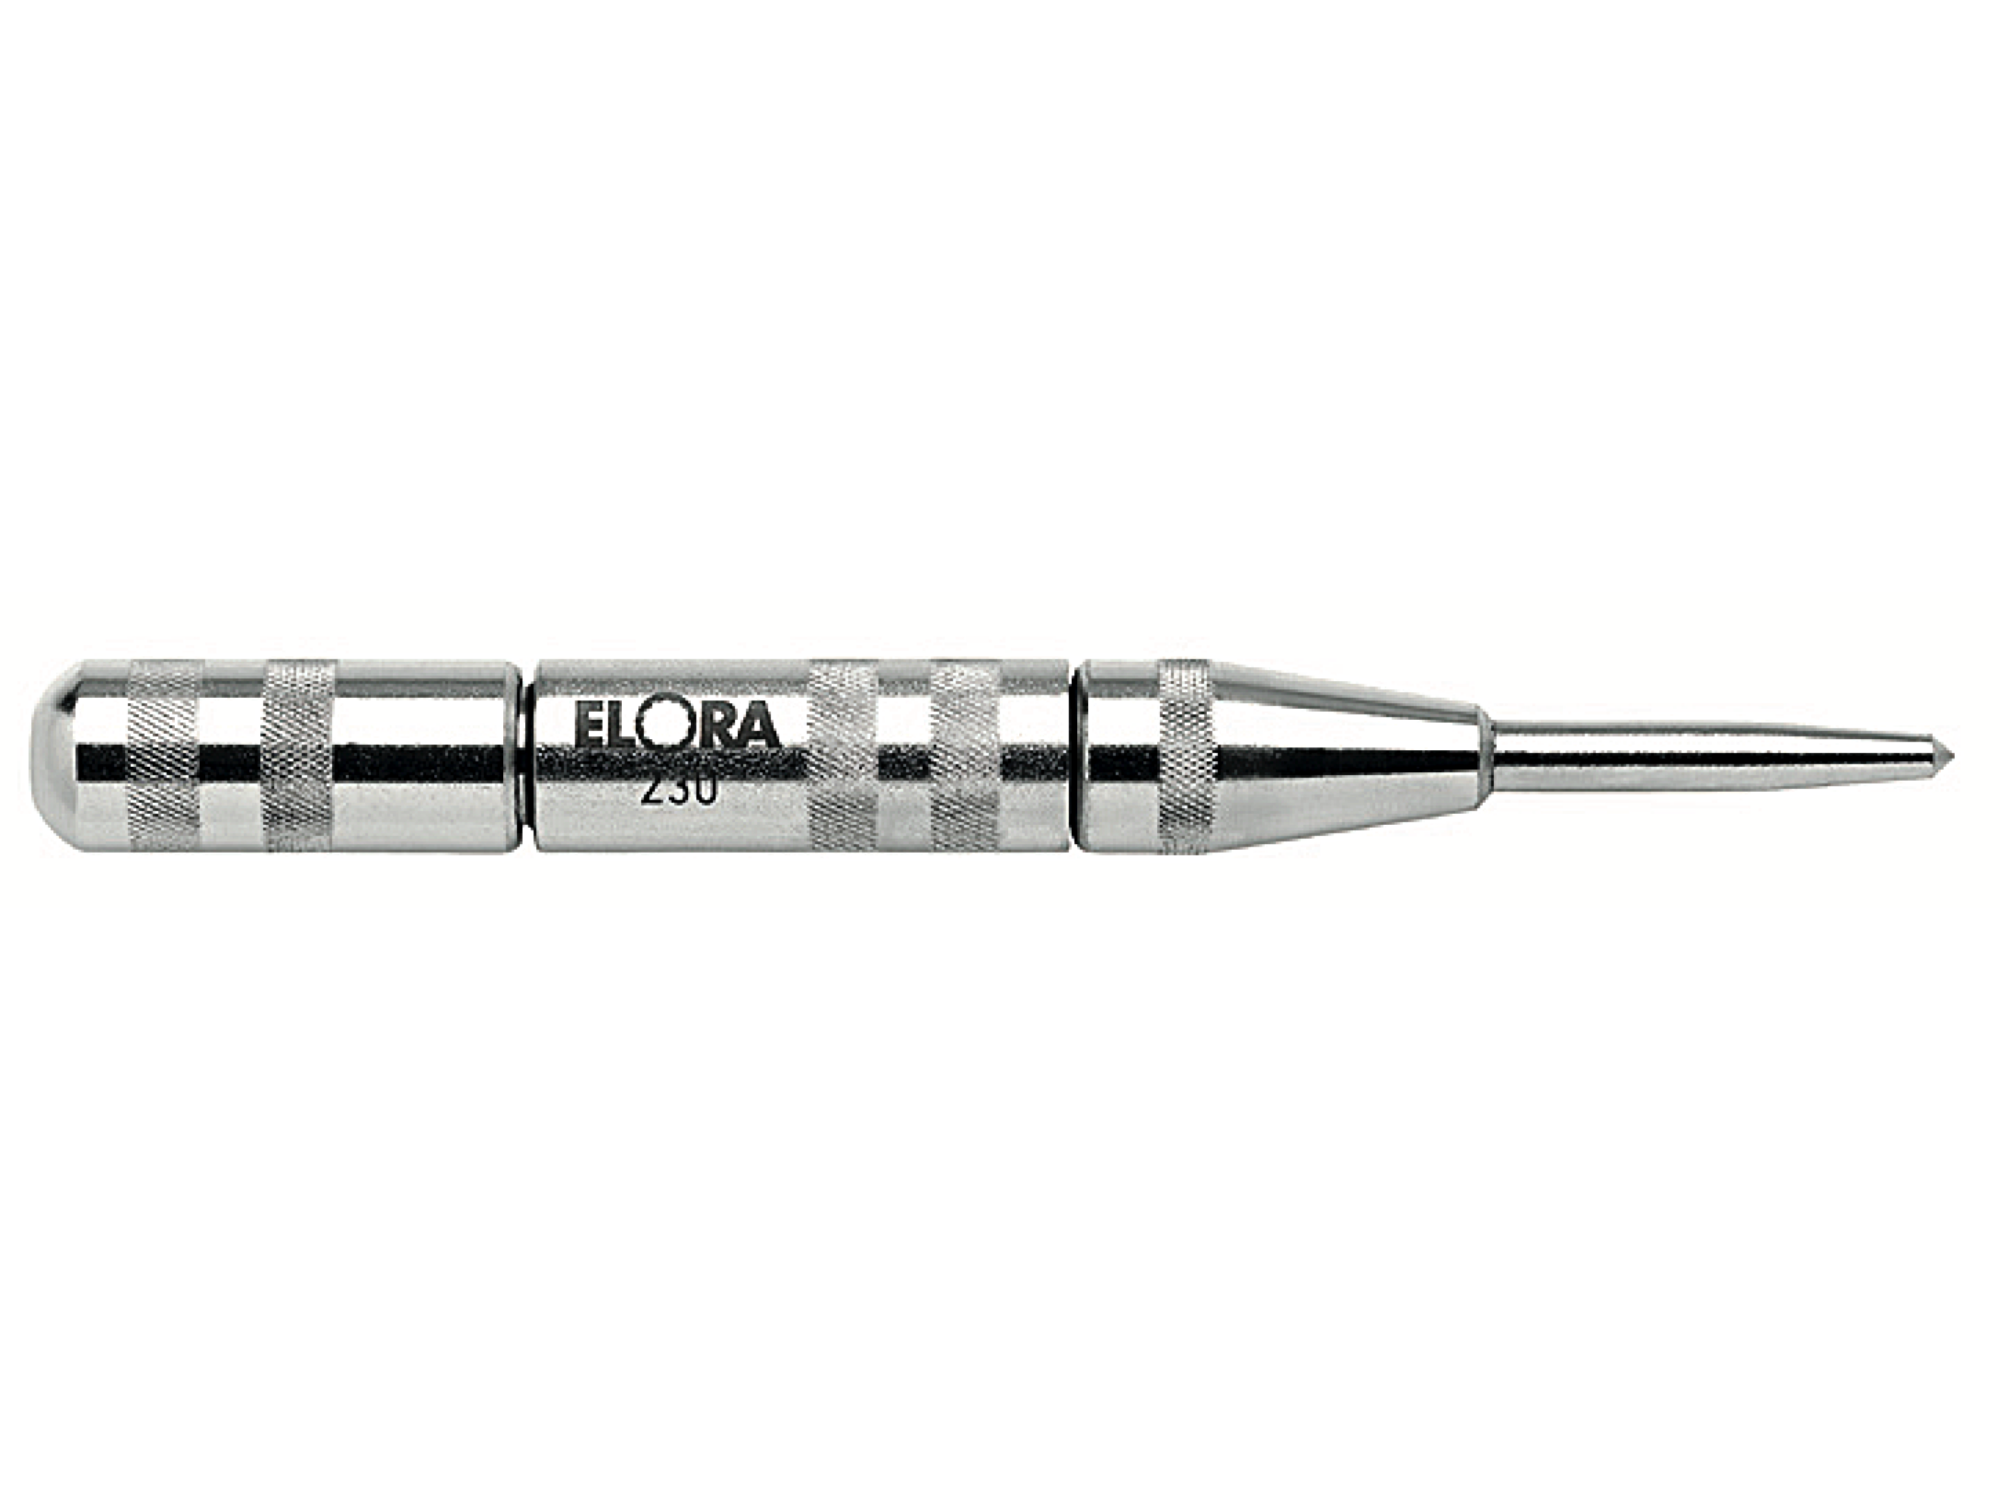 ELORA 230 Automatic Punch  (ELORA Tools) - Premium Automatic Punch from ELORA - Shop now at Yew Aik.